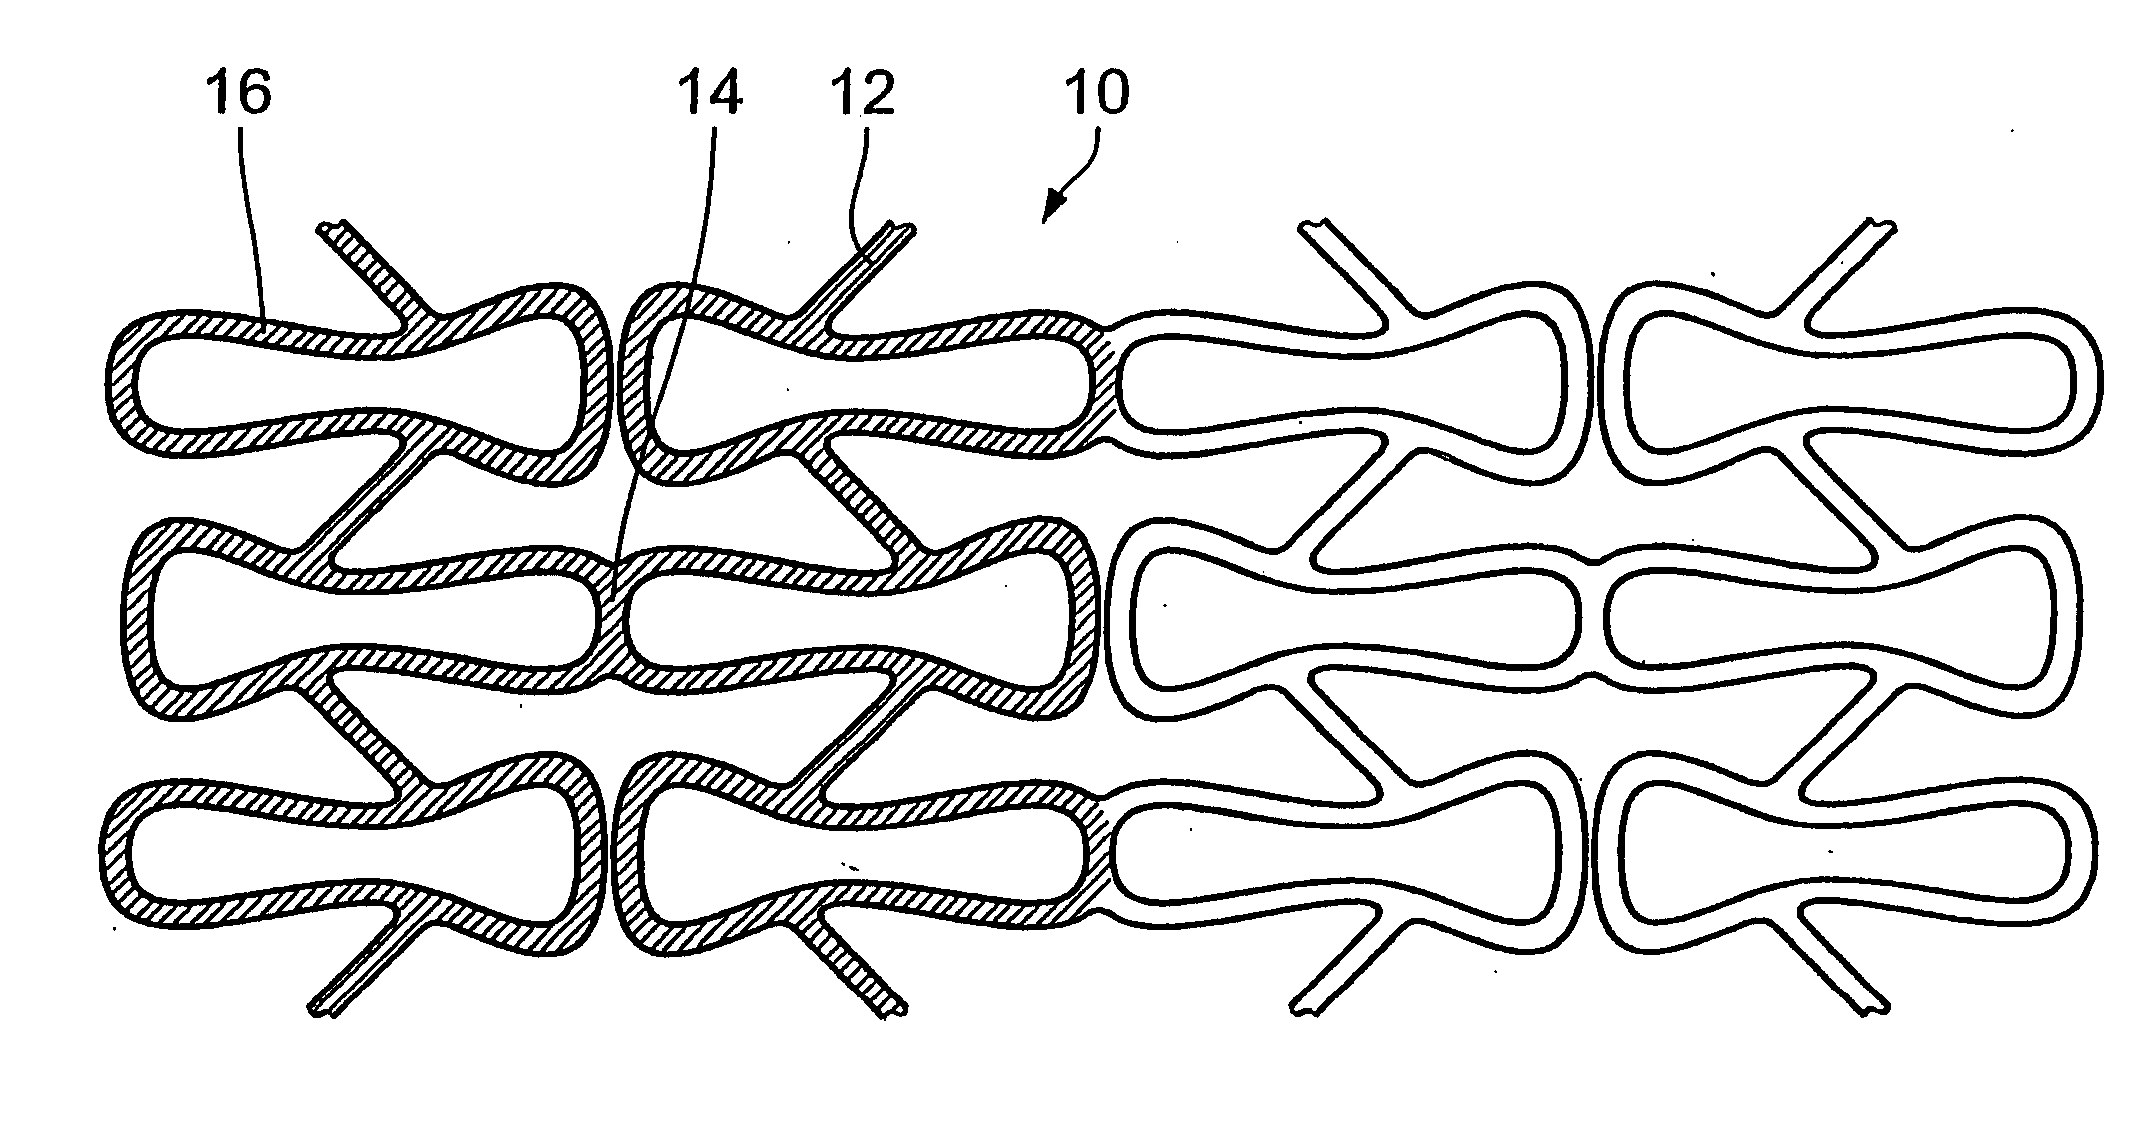 Stent with polymeric coating